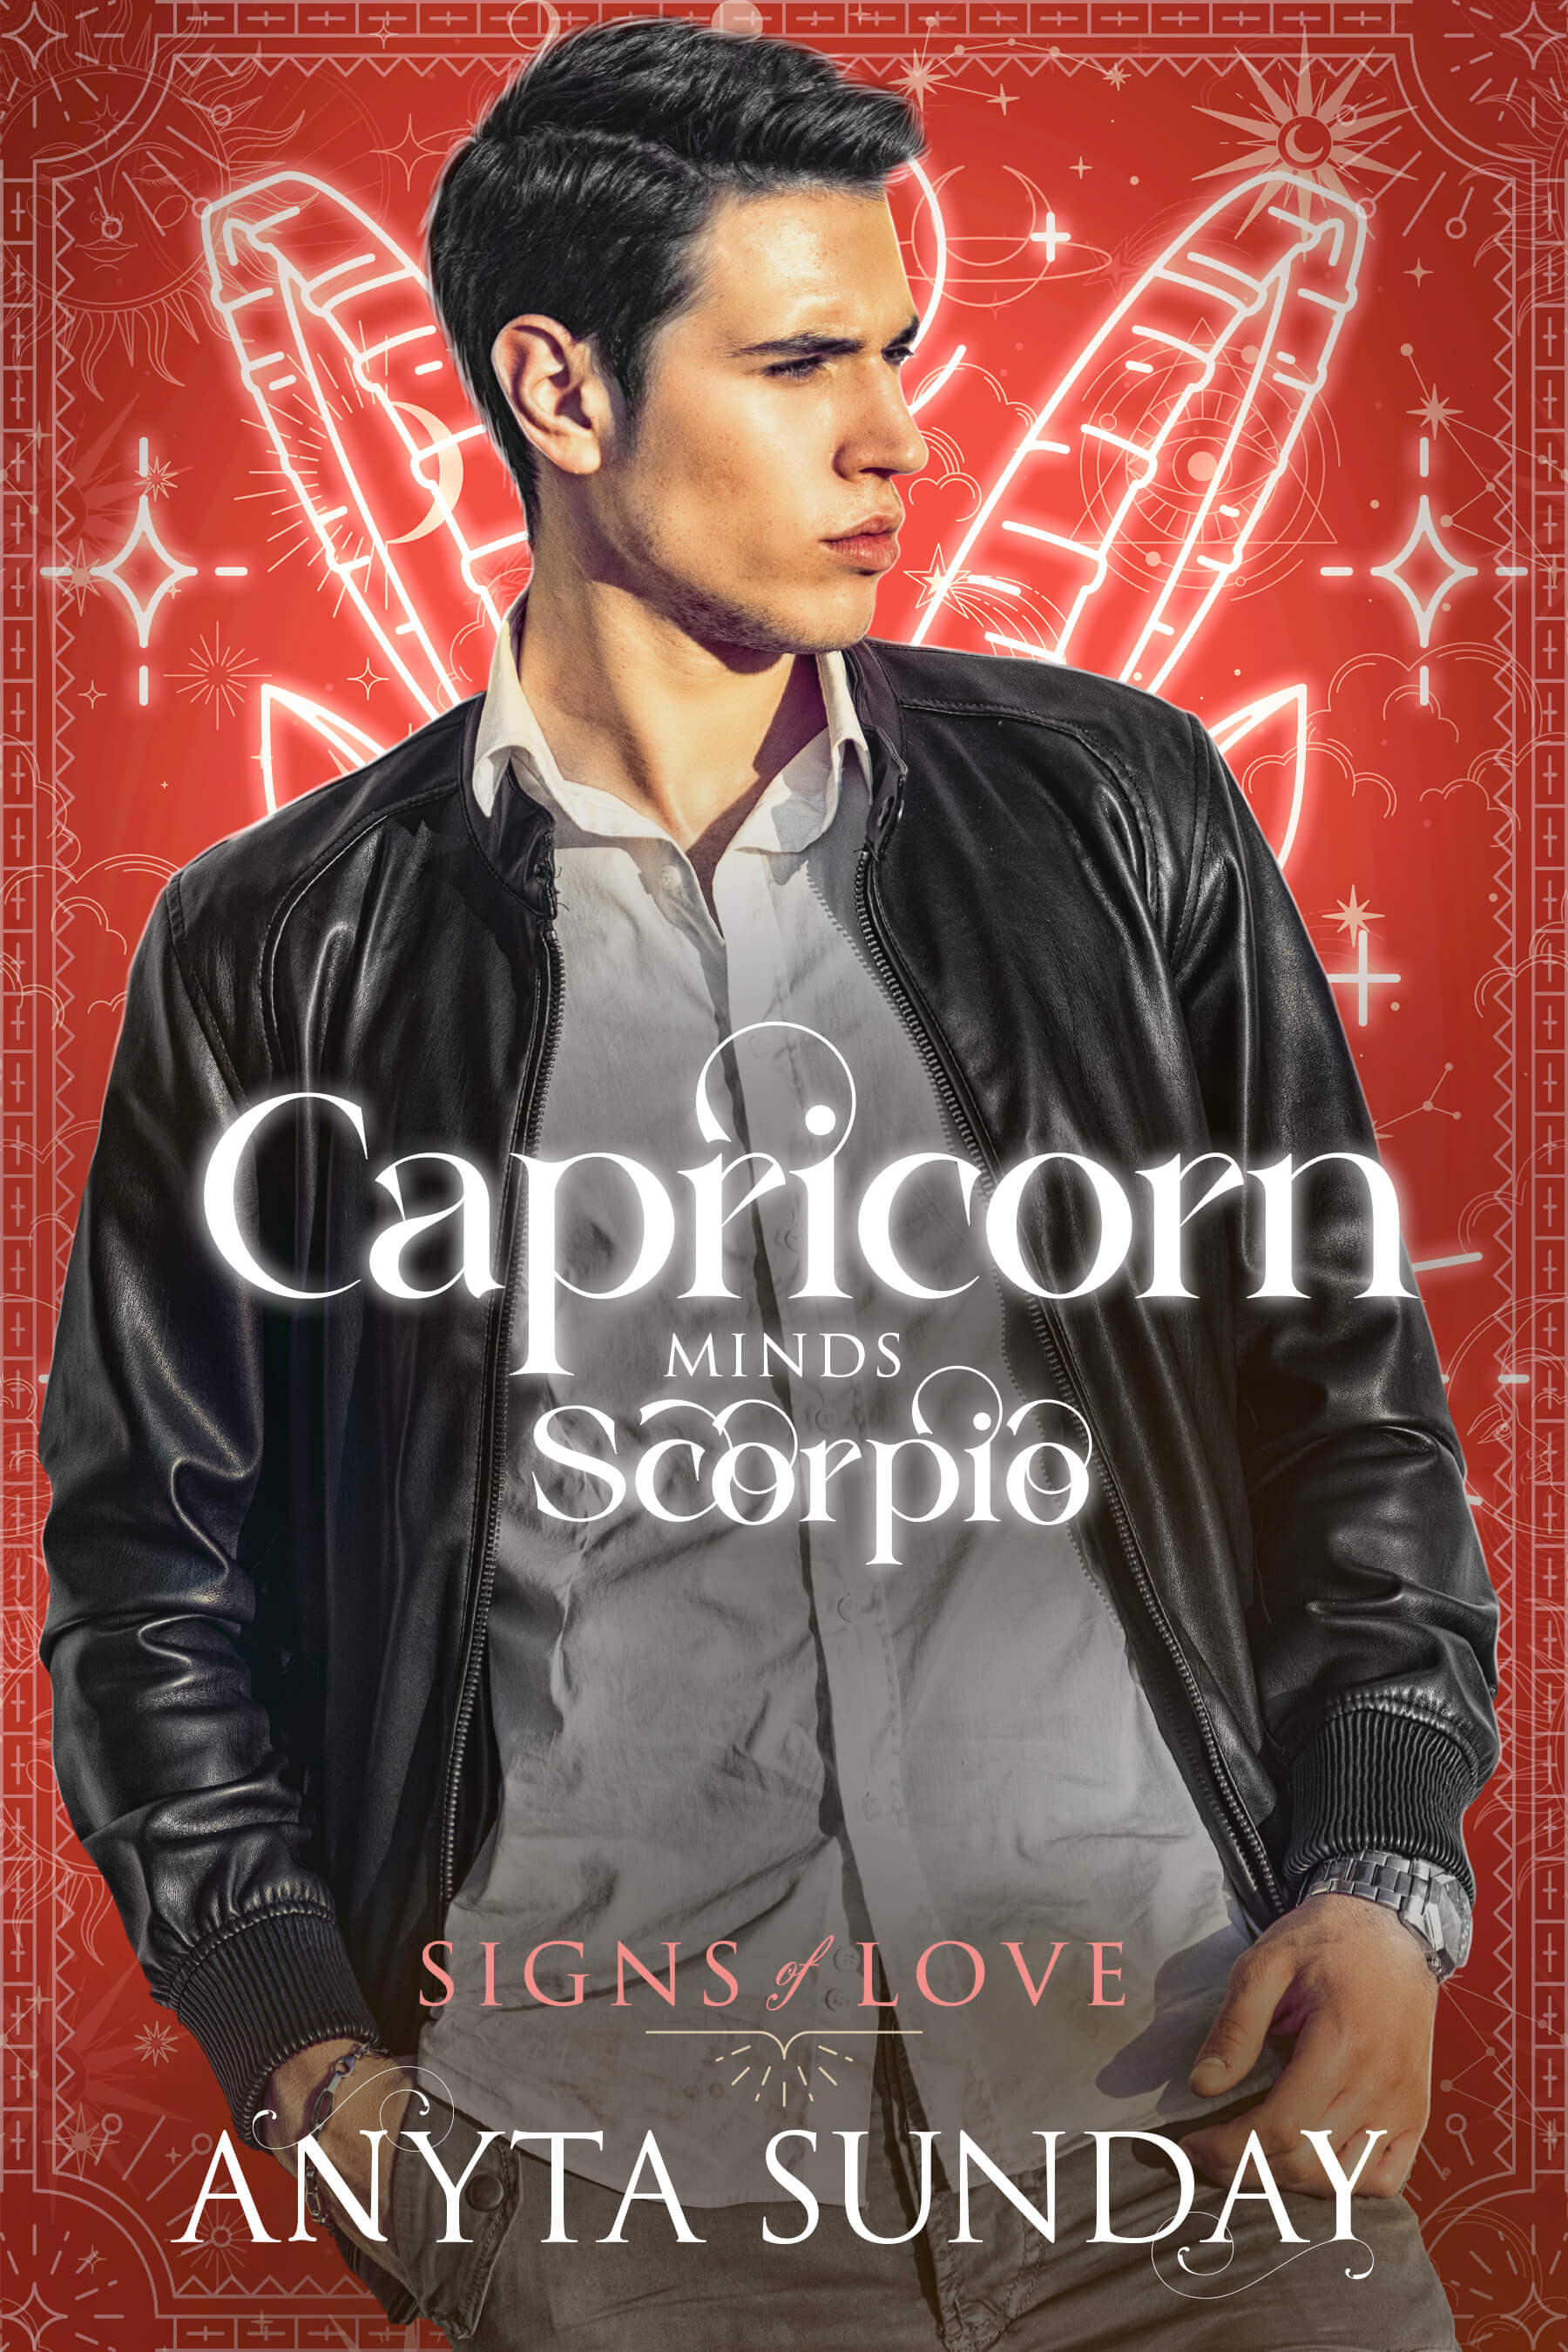 Capricorn Minds Scorpio, gay romantic comedy by Anyta Sunday. Book 7 in the Signs of Love series.